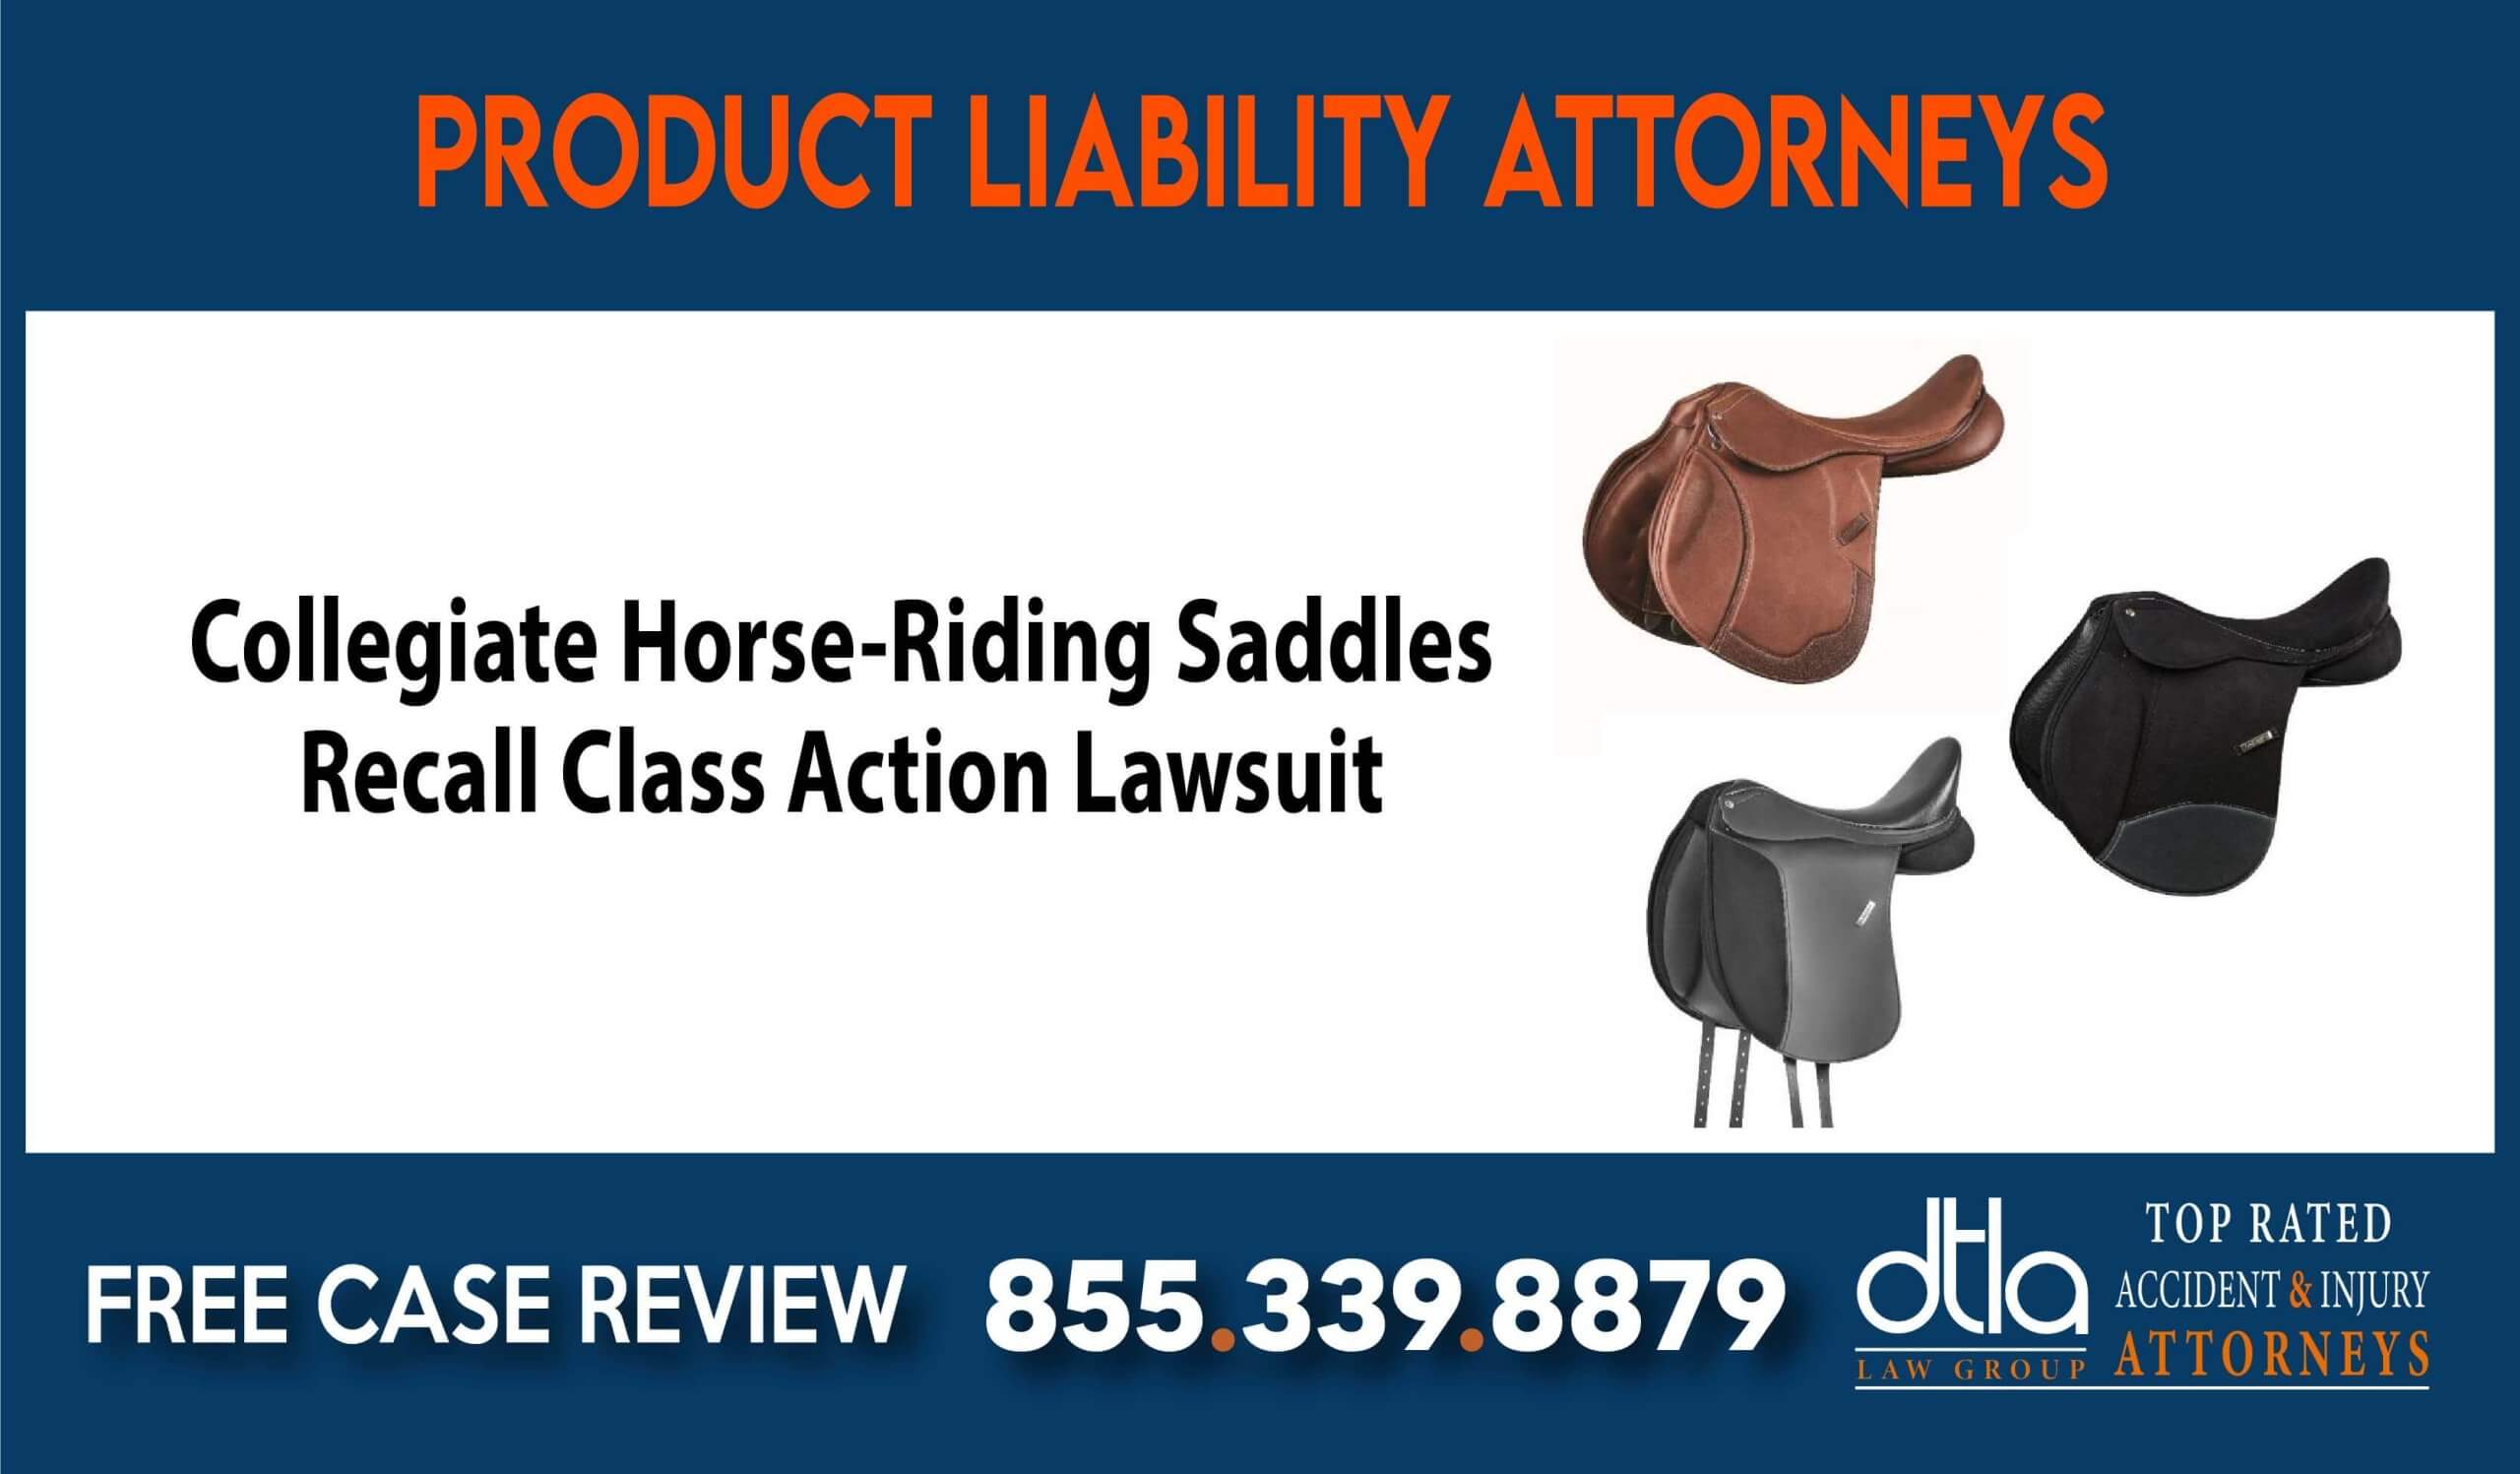 Collegiate Horse-Riding Saddles Recall Class Action Lawsuit lawyer attorney liability sue compensation